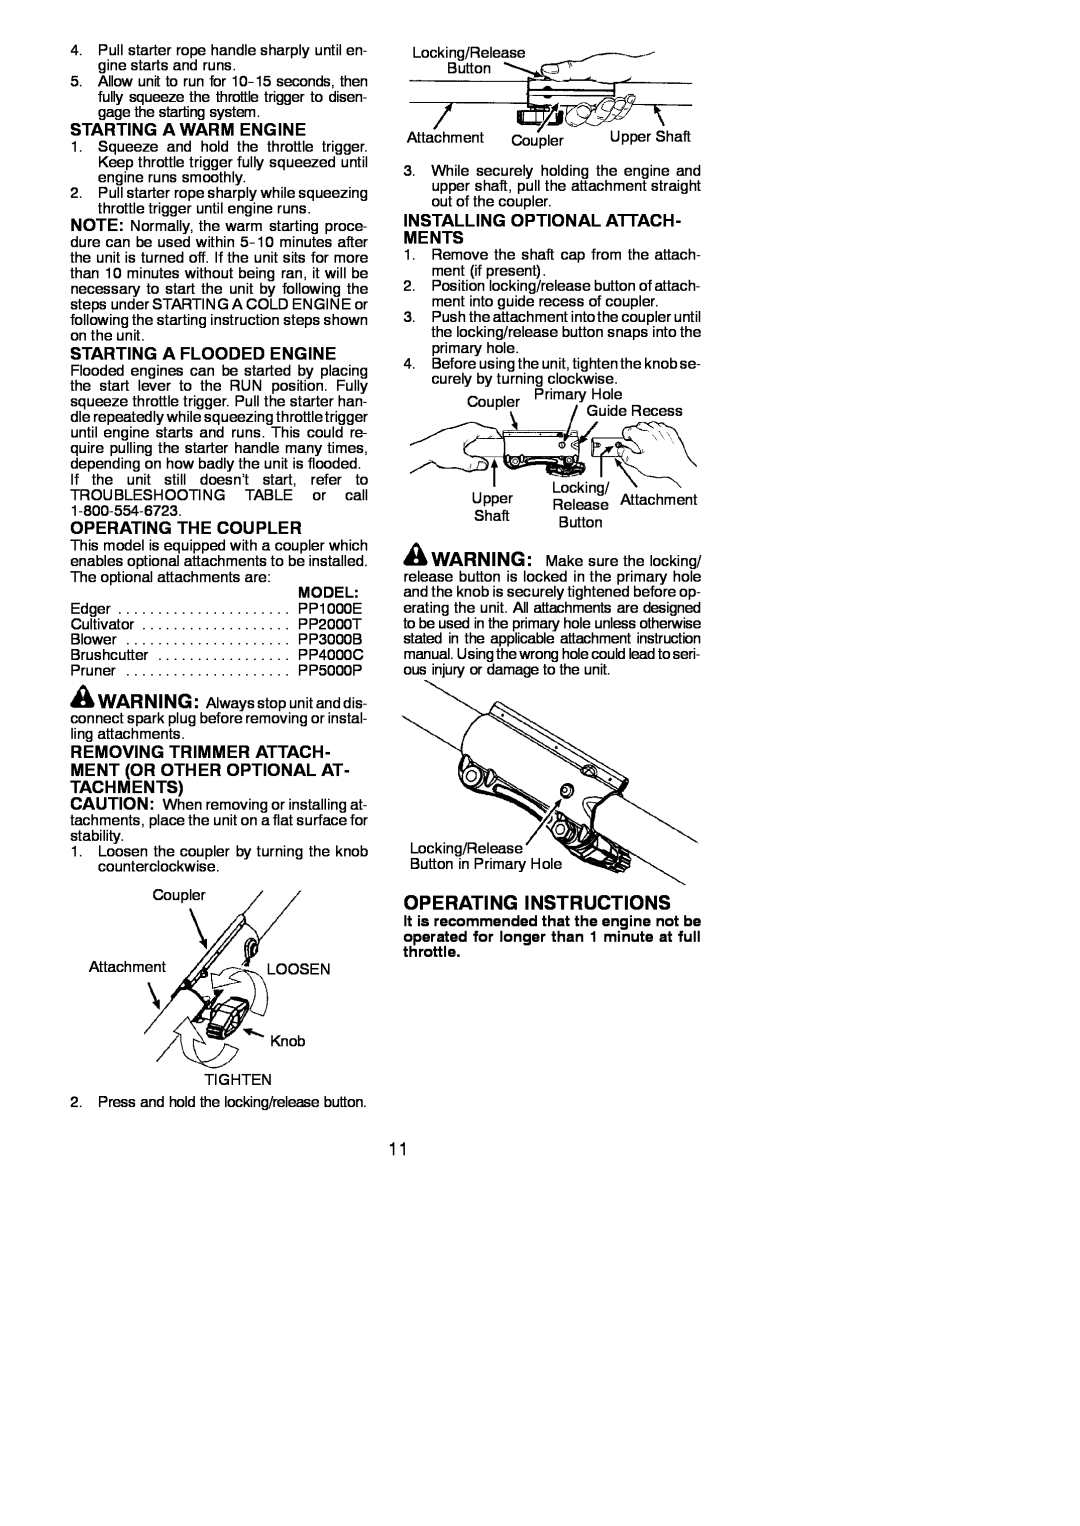 Poulan 115270226 Operating Instructions, Starting A Warm Engine, Starting A Flooded Engine, Operating The Coupler, Model 